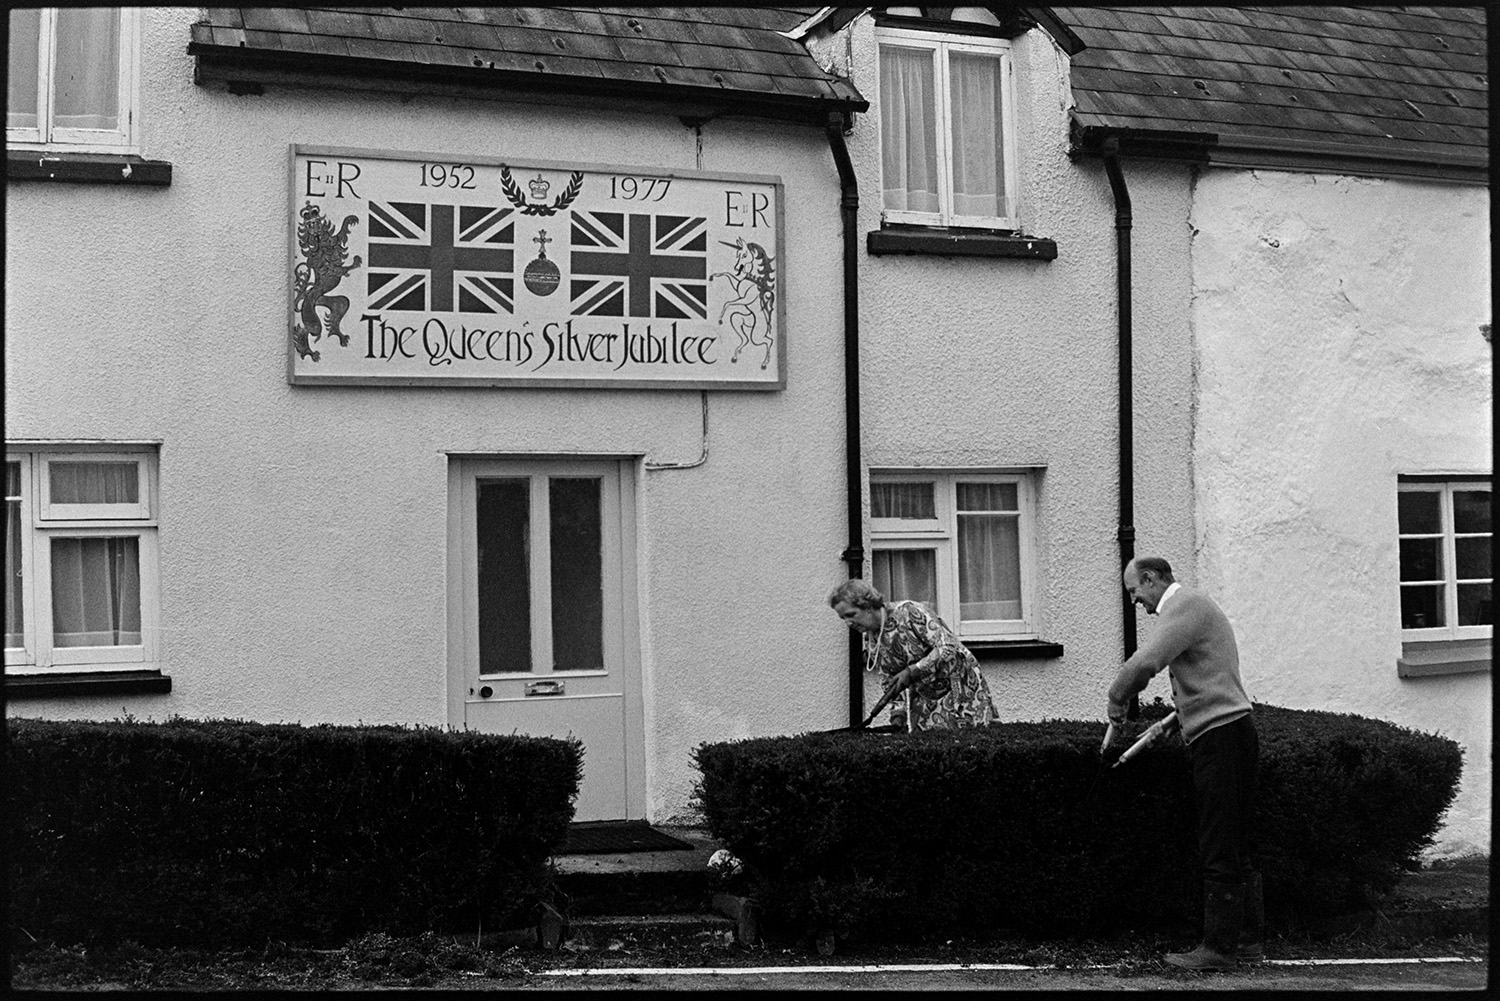 House with large painting of flags etc for Jubilee artist clipping hedge.
[Geoff Siviter and Barbara Siviter trimming the hedge in front of their house in Atherington. The house has a large painted sign above the front door to celebrate the Silver Jubilee of Queen Elizabeth II.]